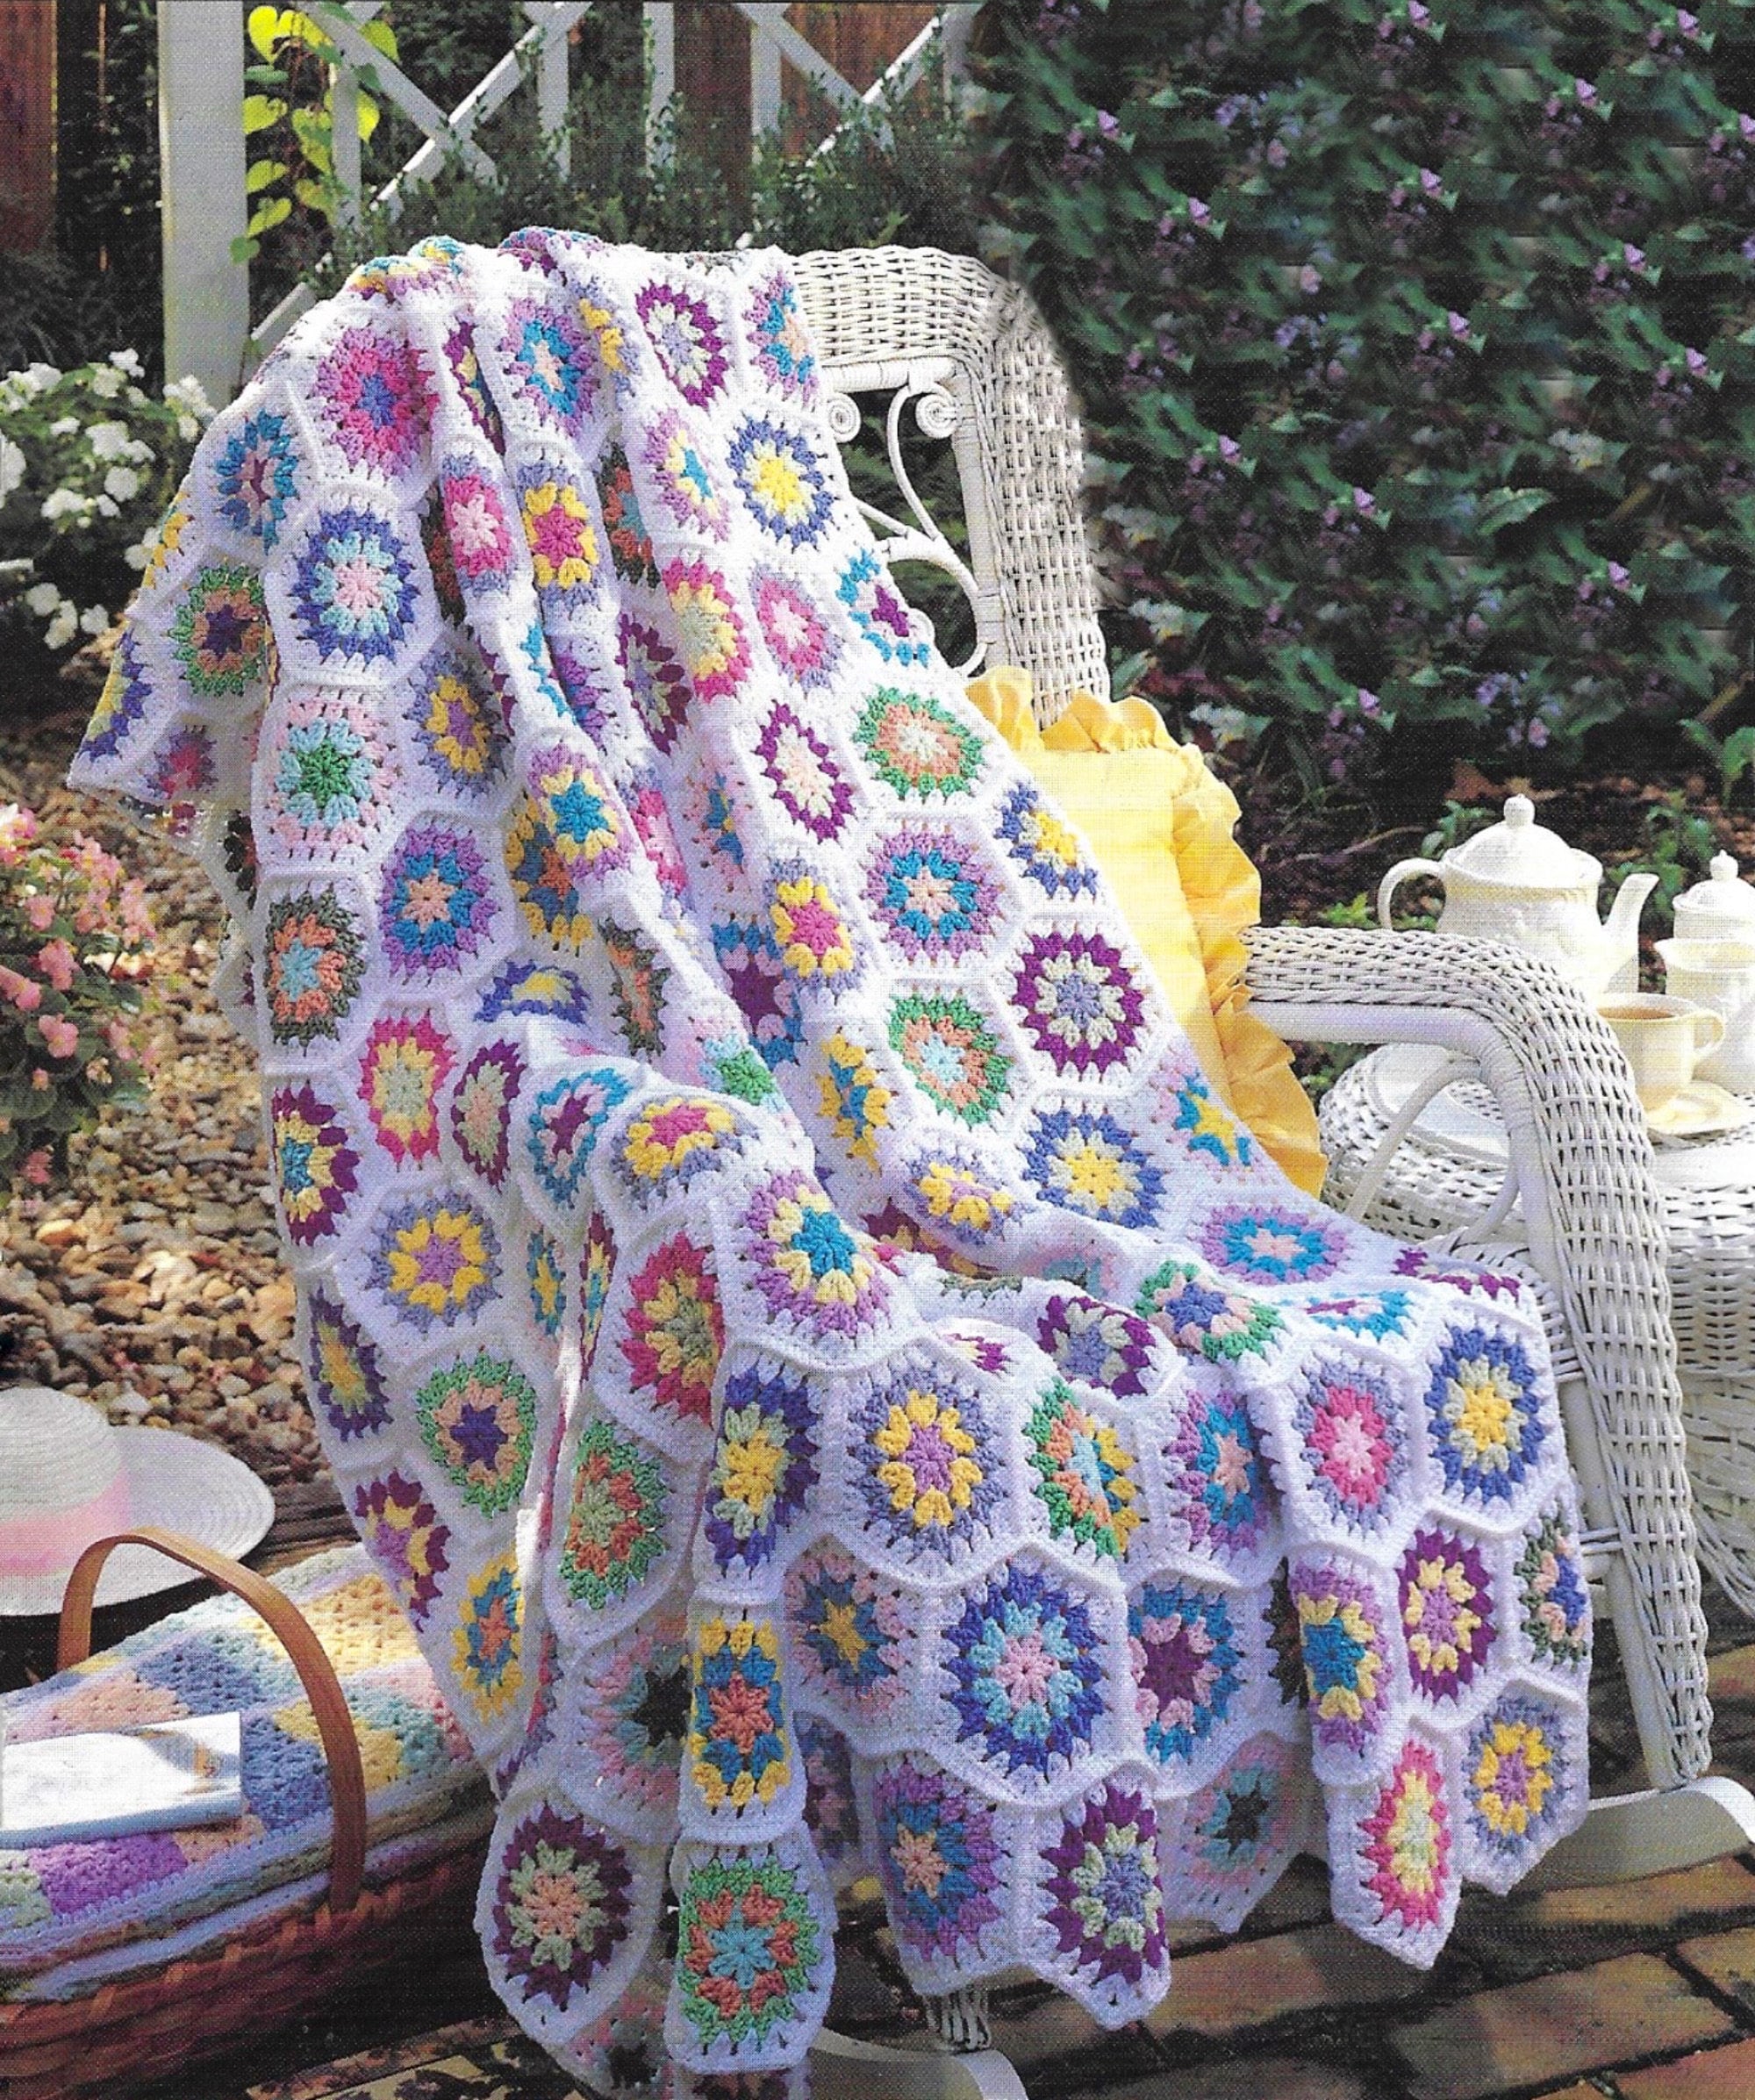 The Granny Square Book Timeless Techniques and Fresh Ideas for Crocheting  Square by Square E-book Instant Download PDF Files 